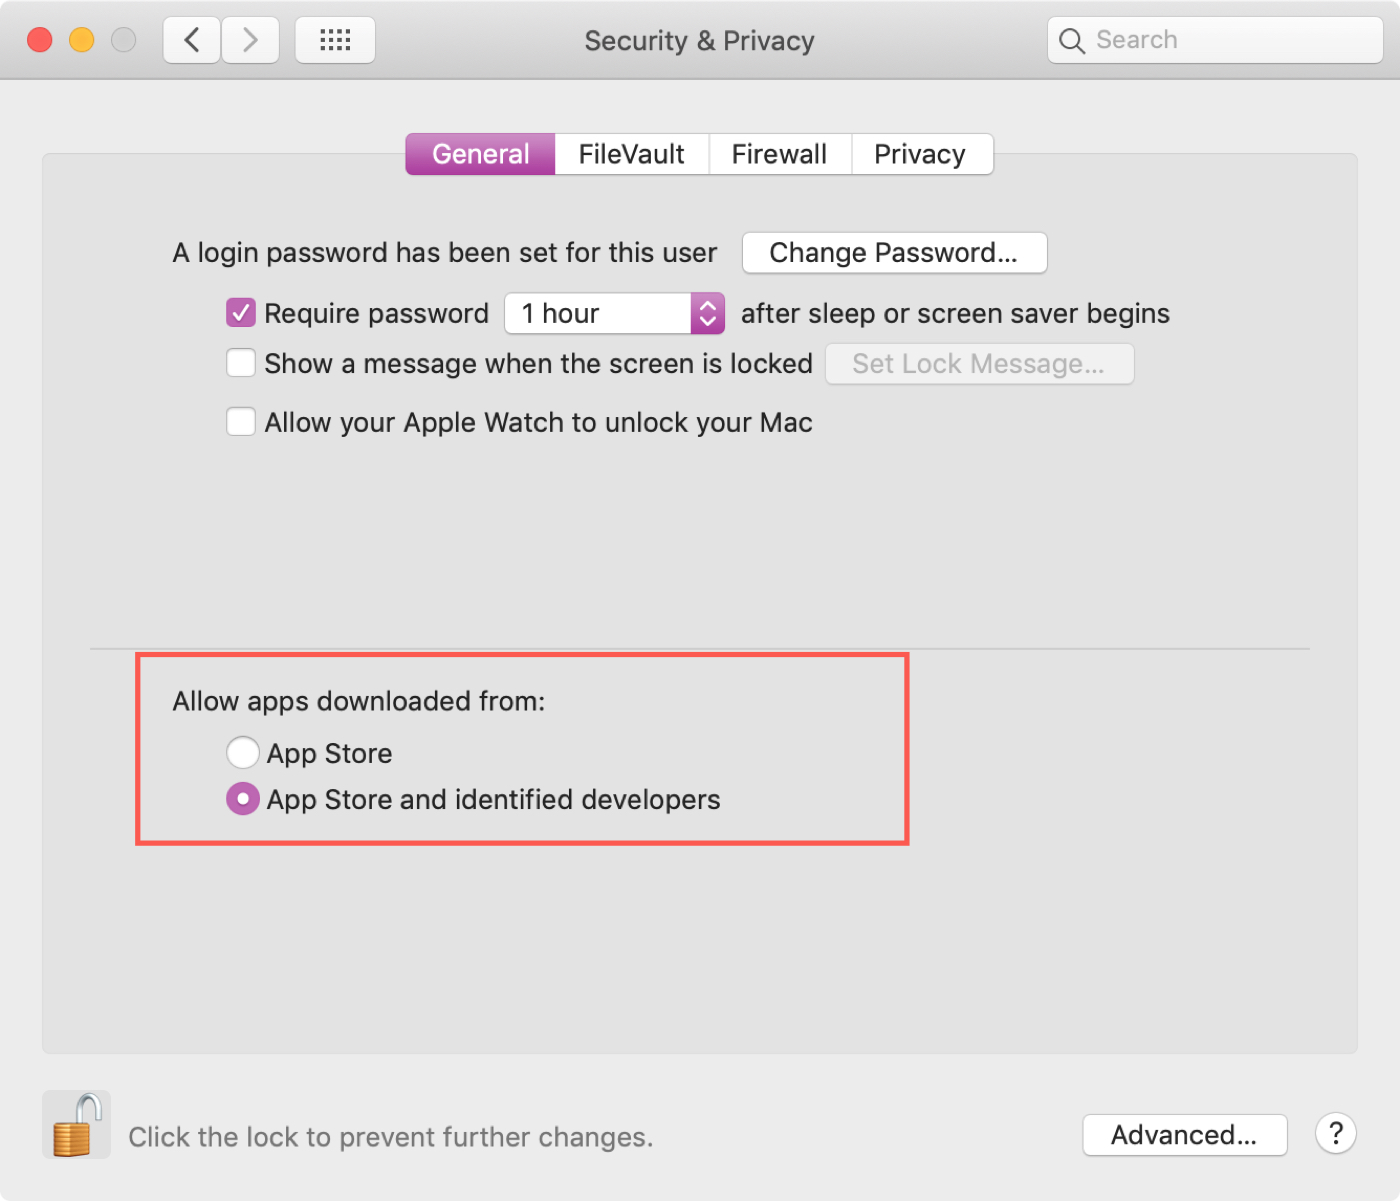 Security and Privacy App Store Choices